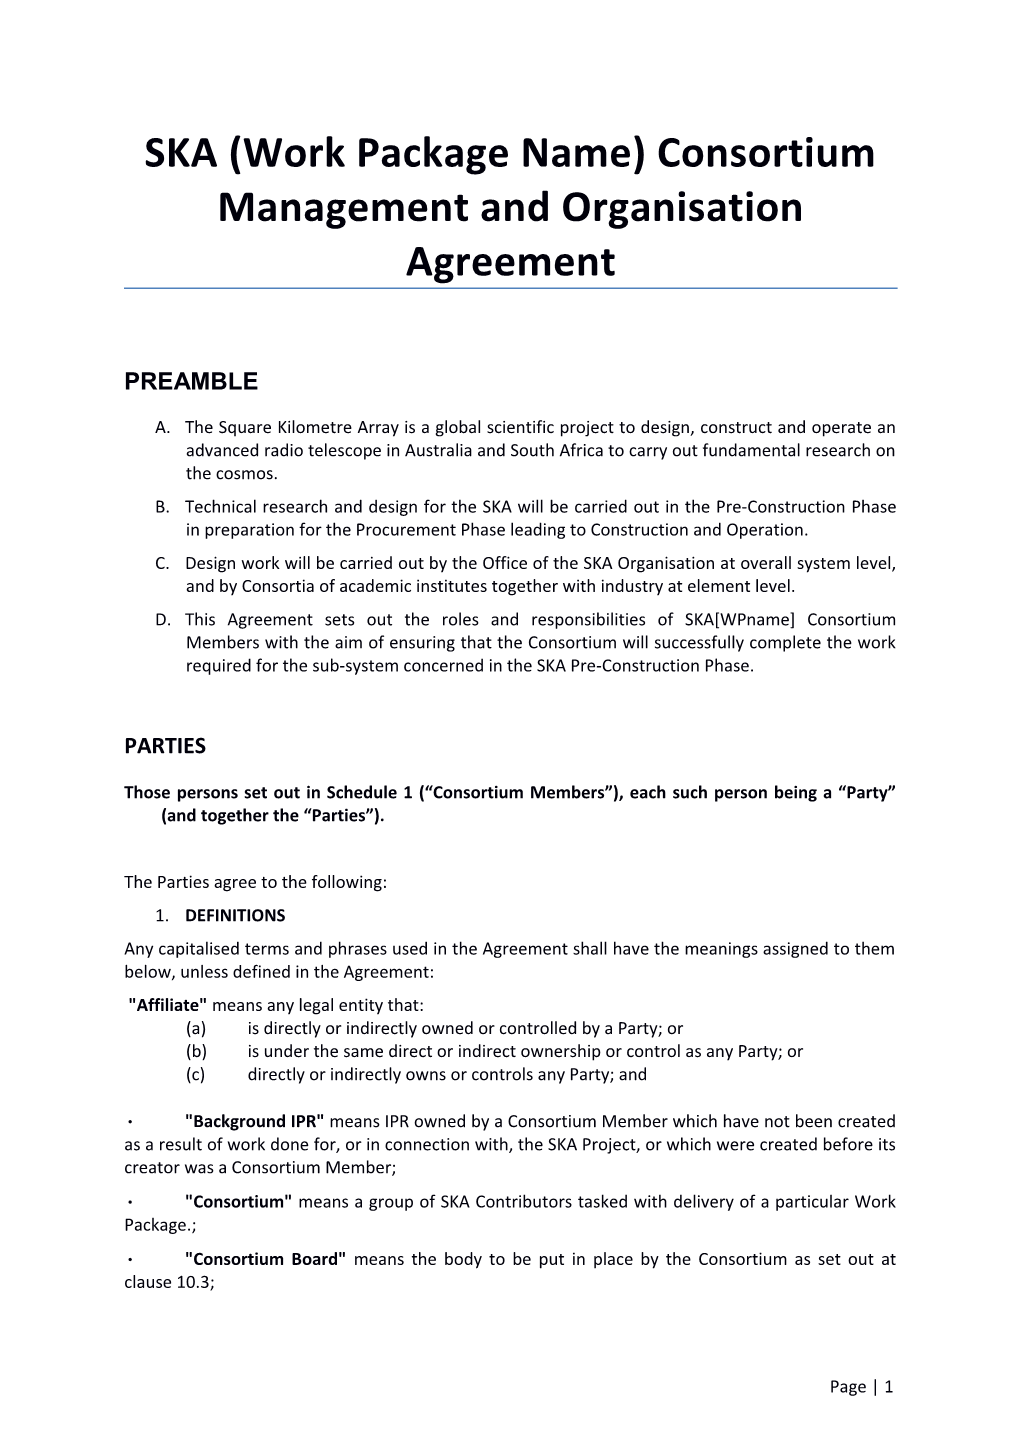 SKA (Work Package Name) Consortium Management and Organisation Agreement